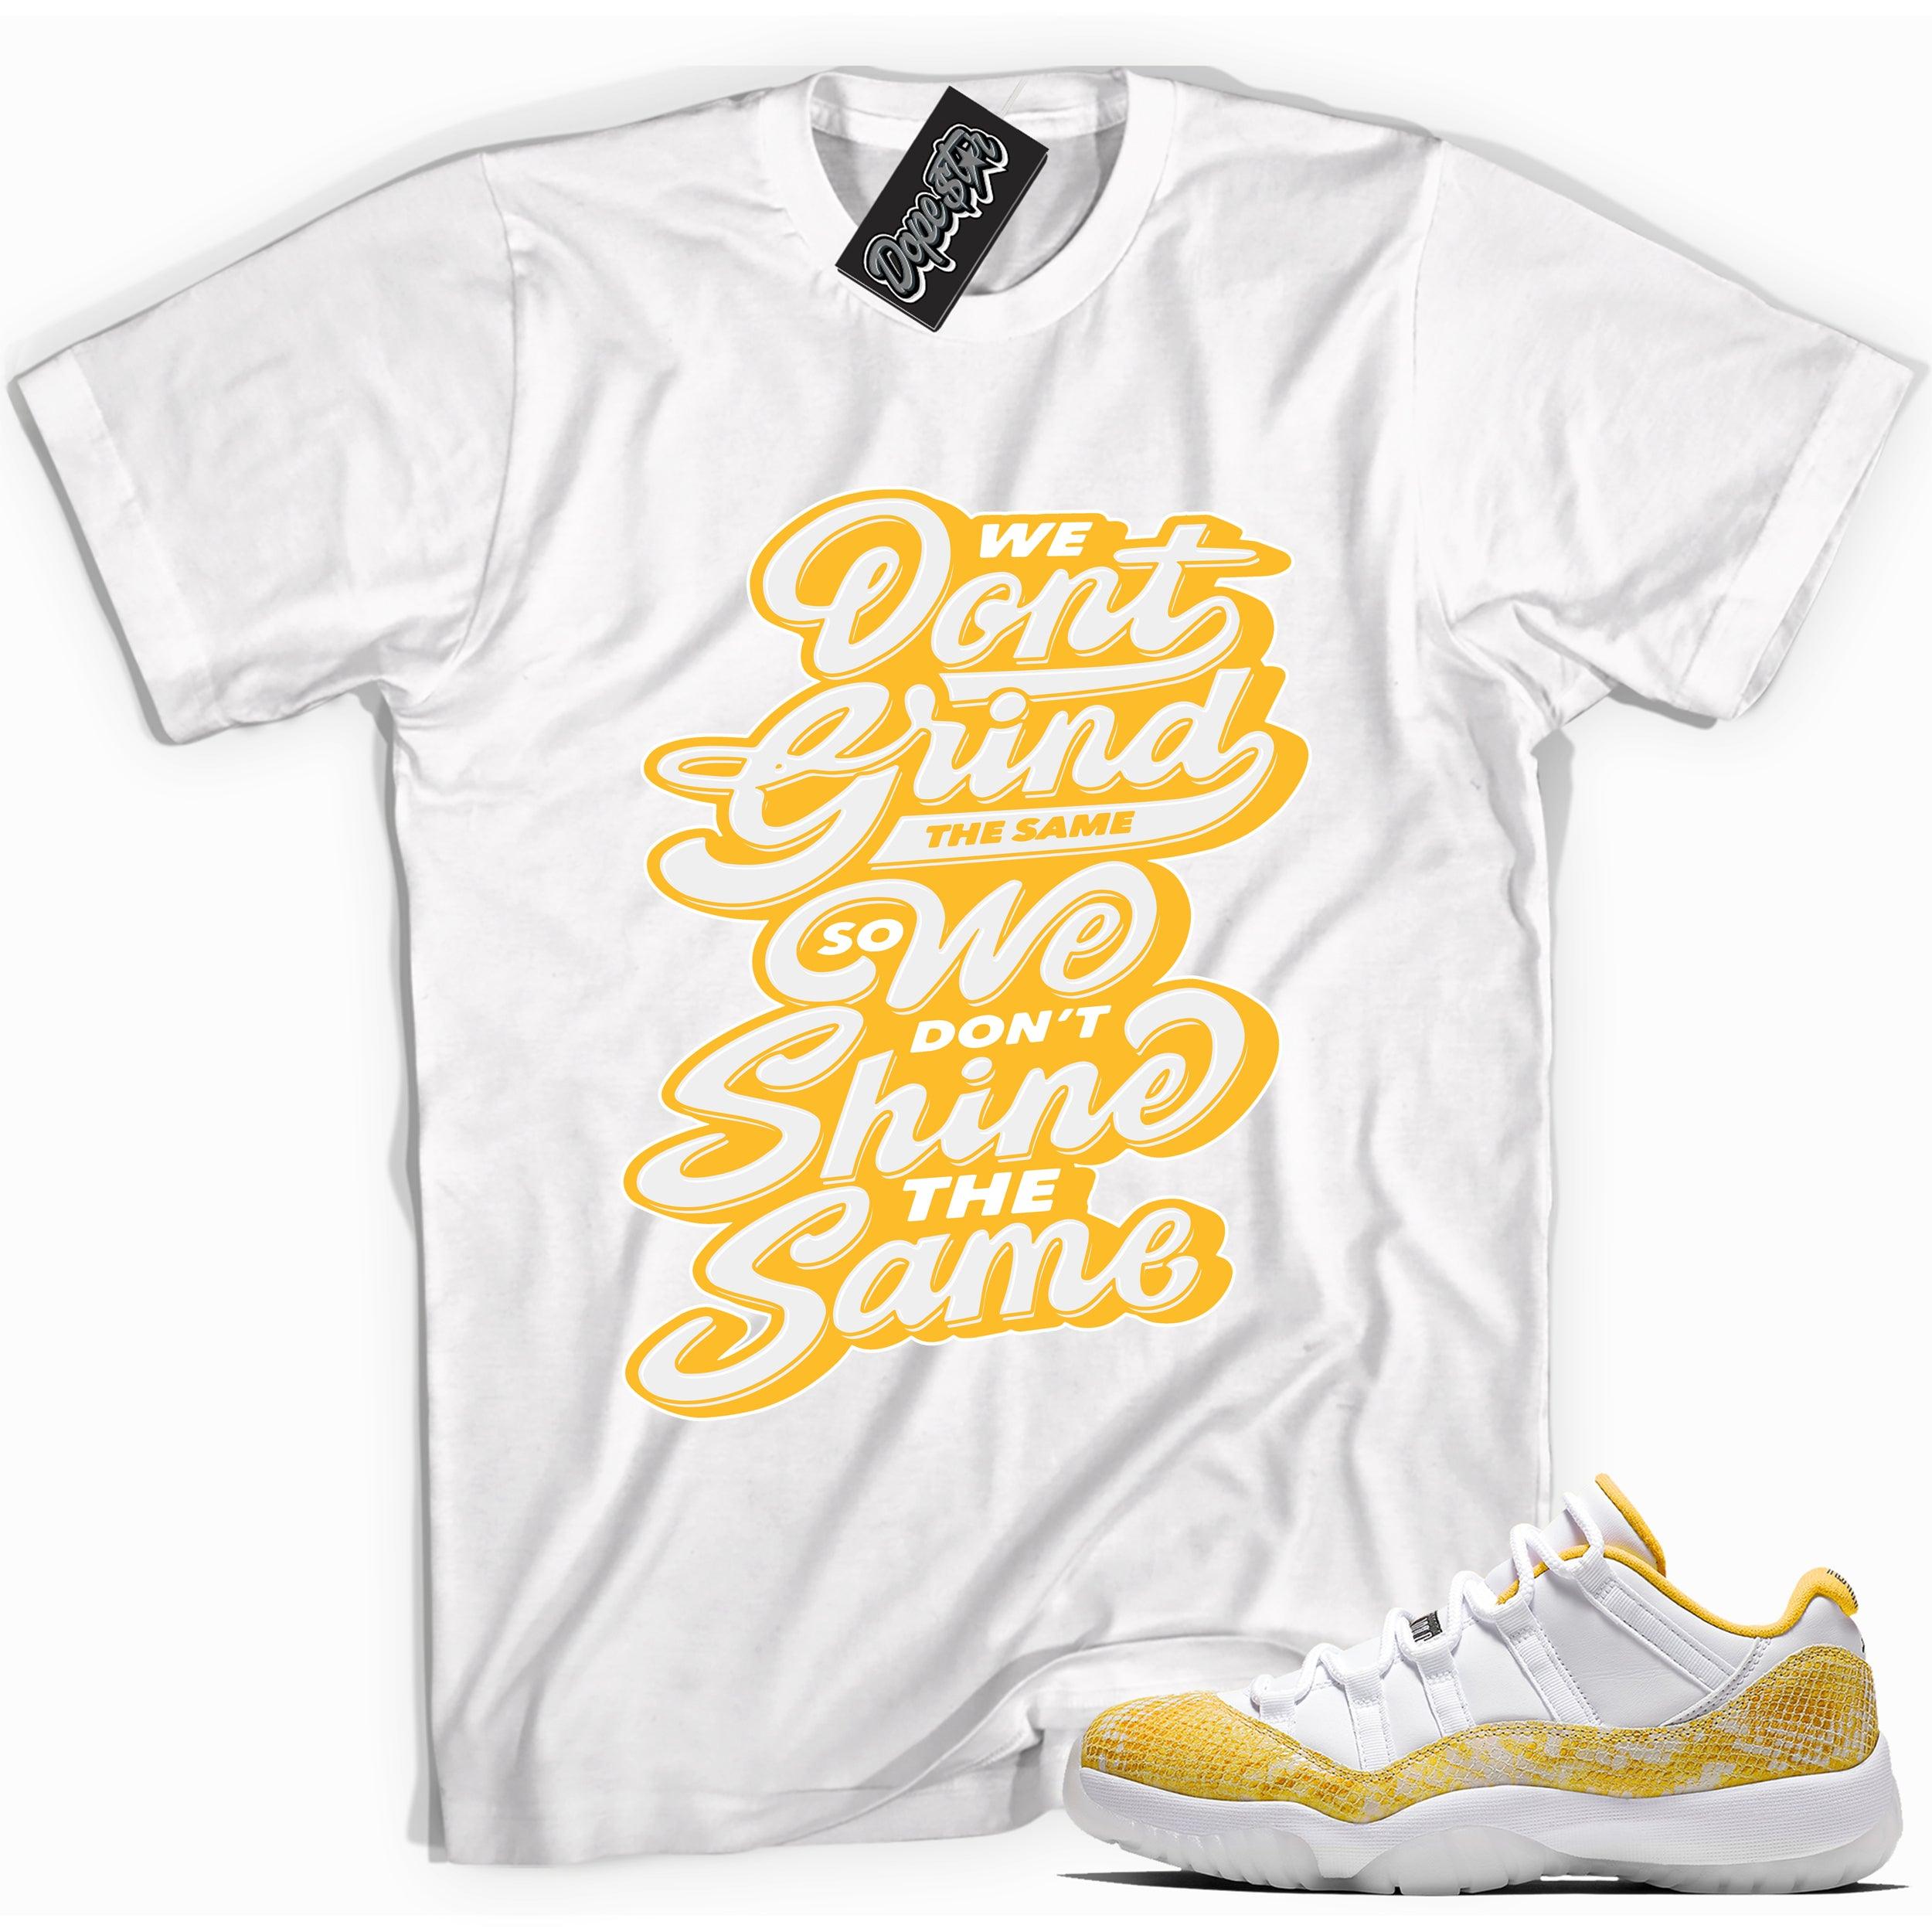 Cool white graphic tee with 'don't grind don't shine the same' print, that perfectly matches Air Jordan 11 Low Yellow Snakeskin sneakers